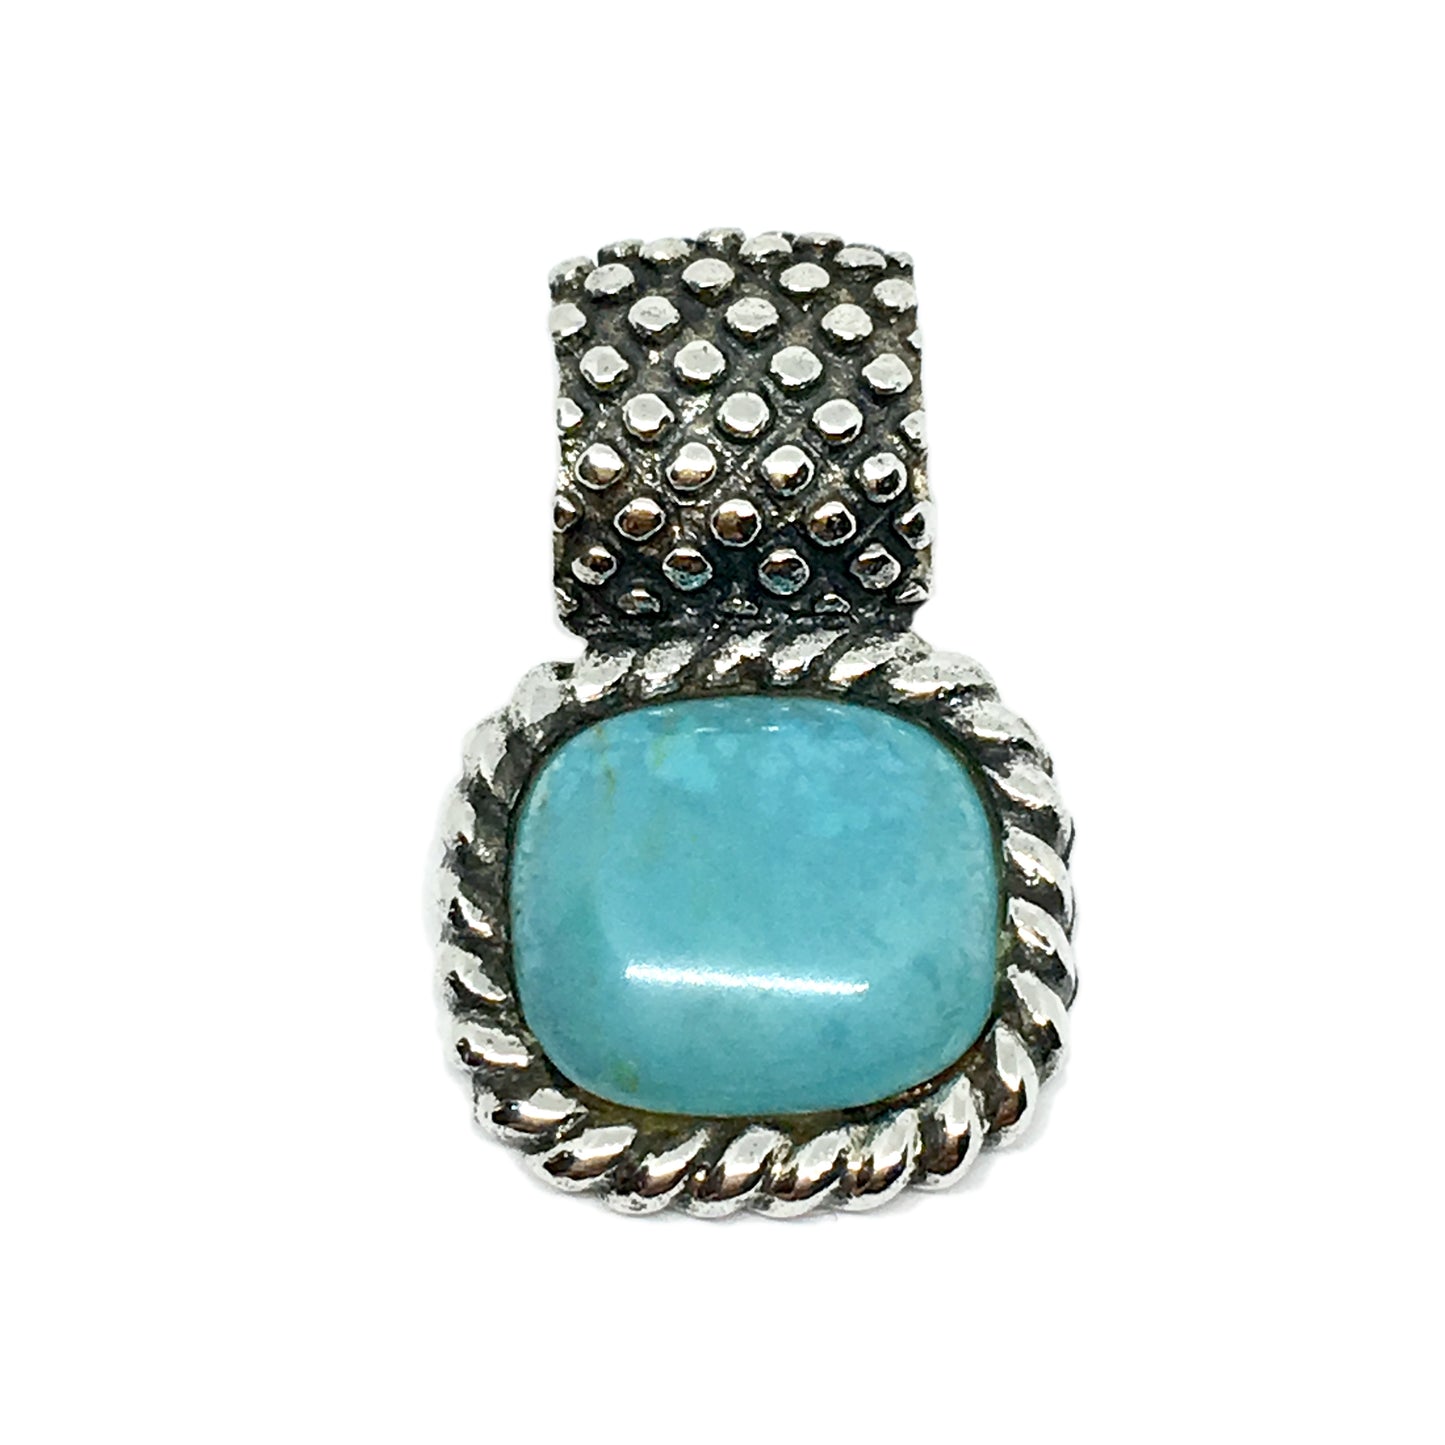 Pendant - Pebble Texture Sterling Silver Blue Turquoise Stone Pendant - Shopping Safe in the USA